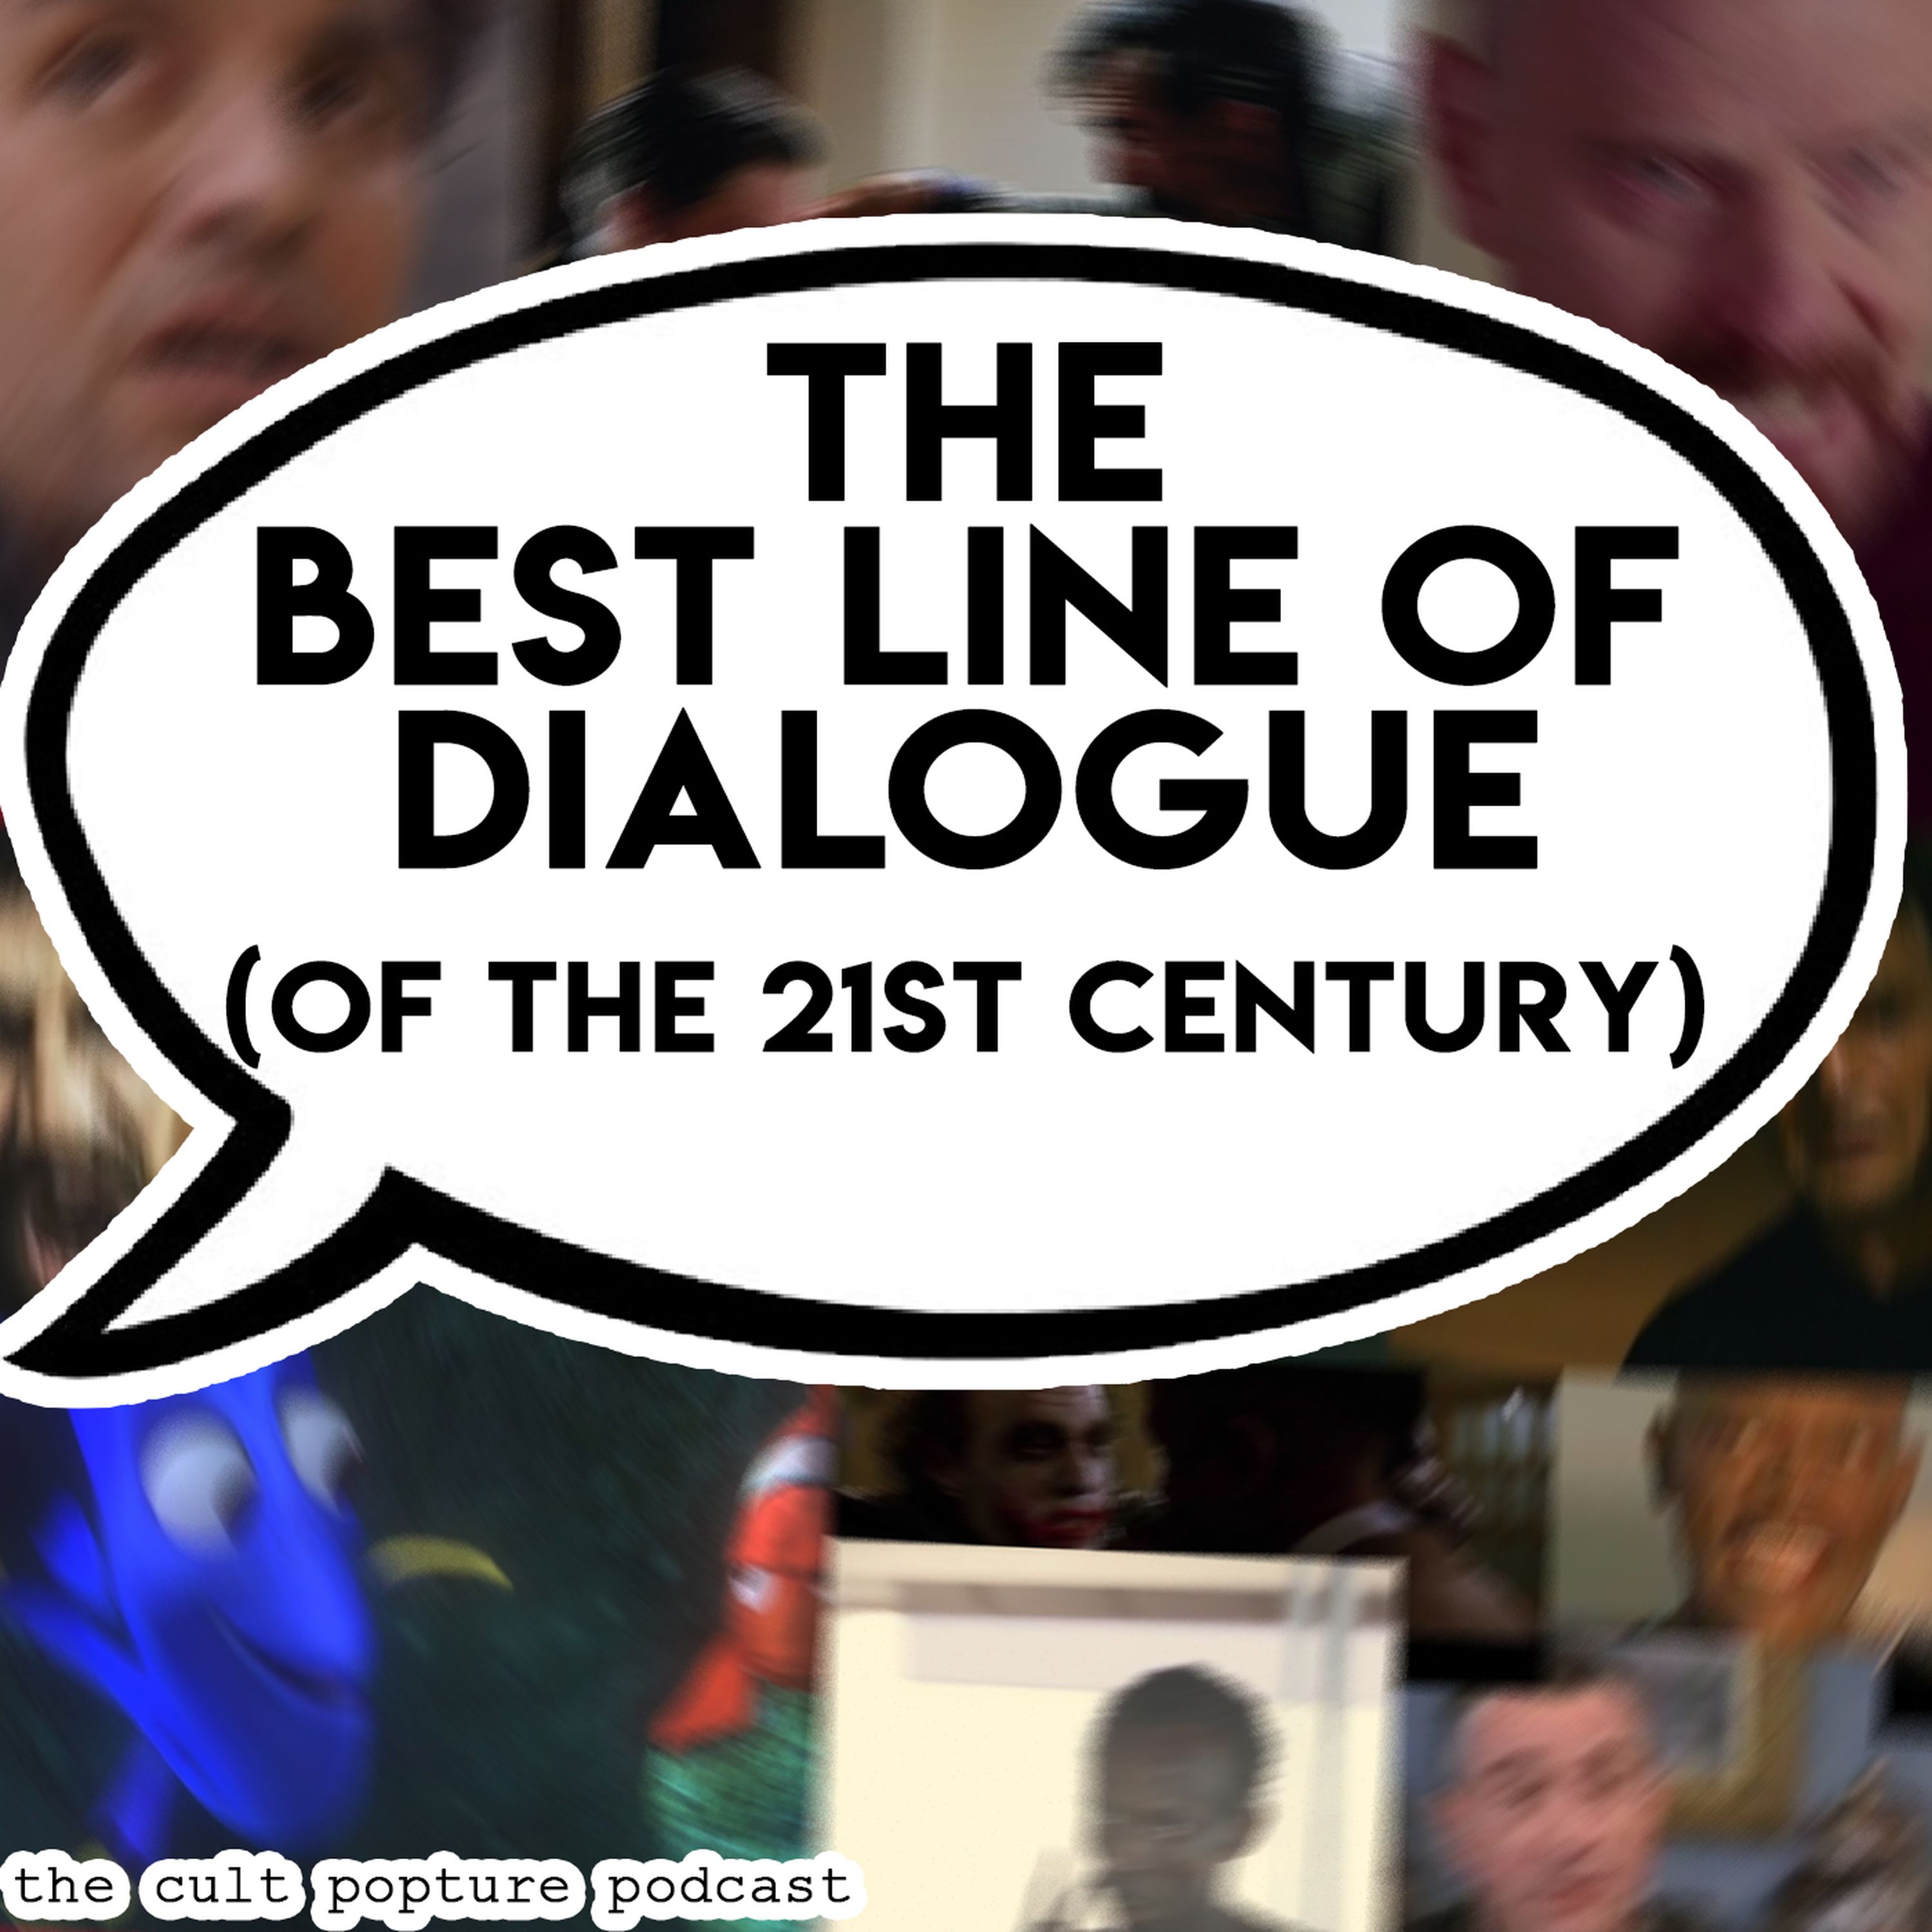 The Best Lines of Dialogue (of the 21st Century) | The Cult Popture Podcast